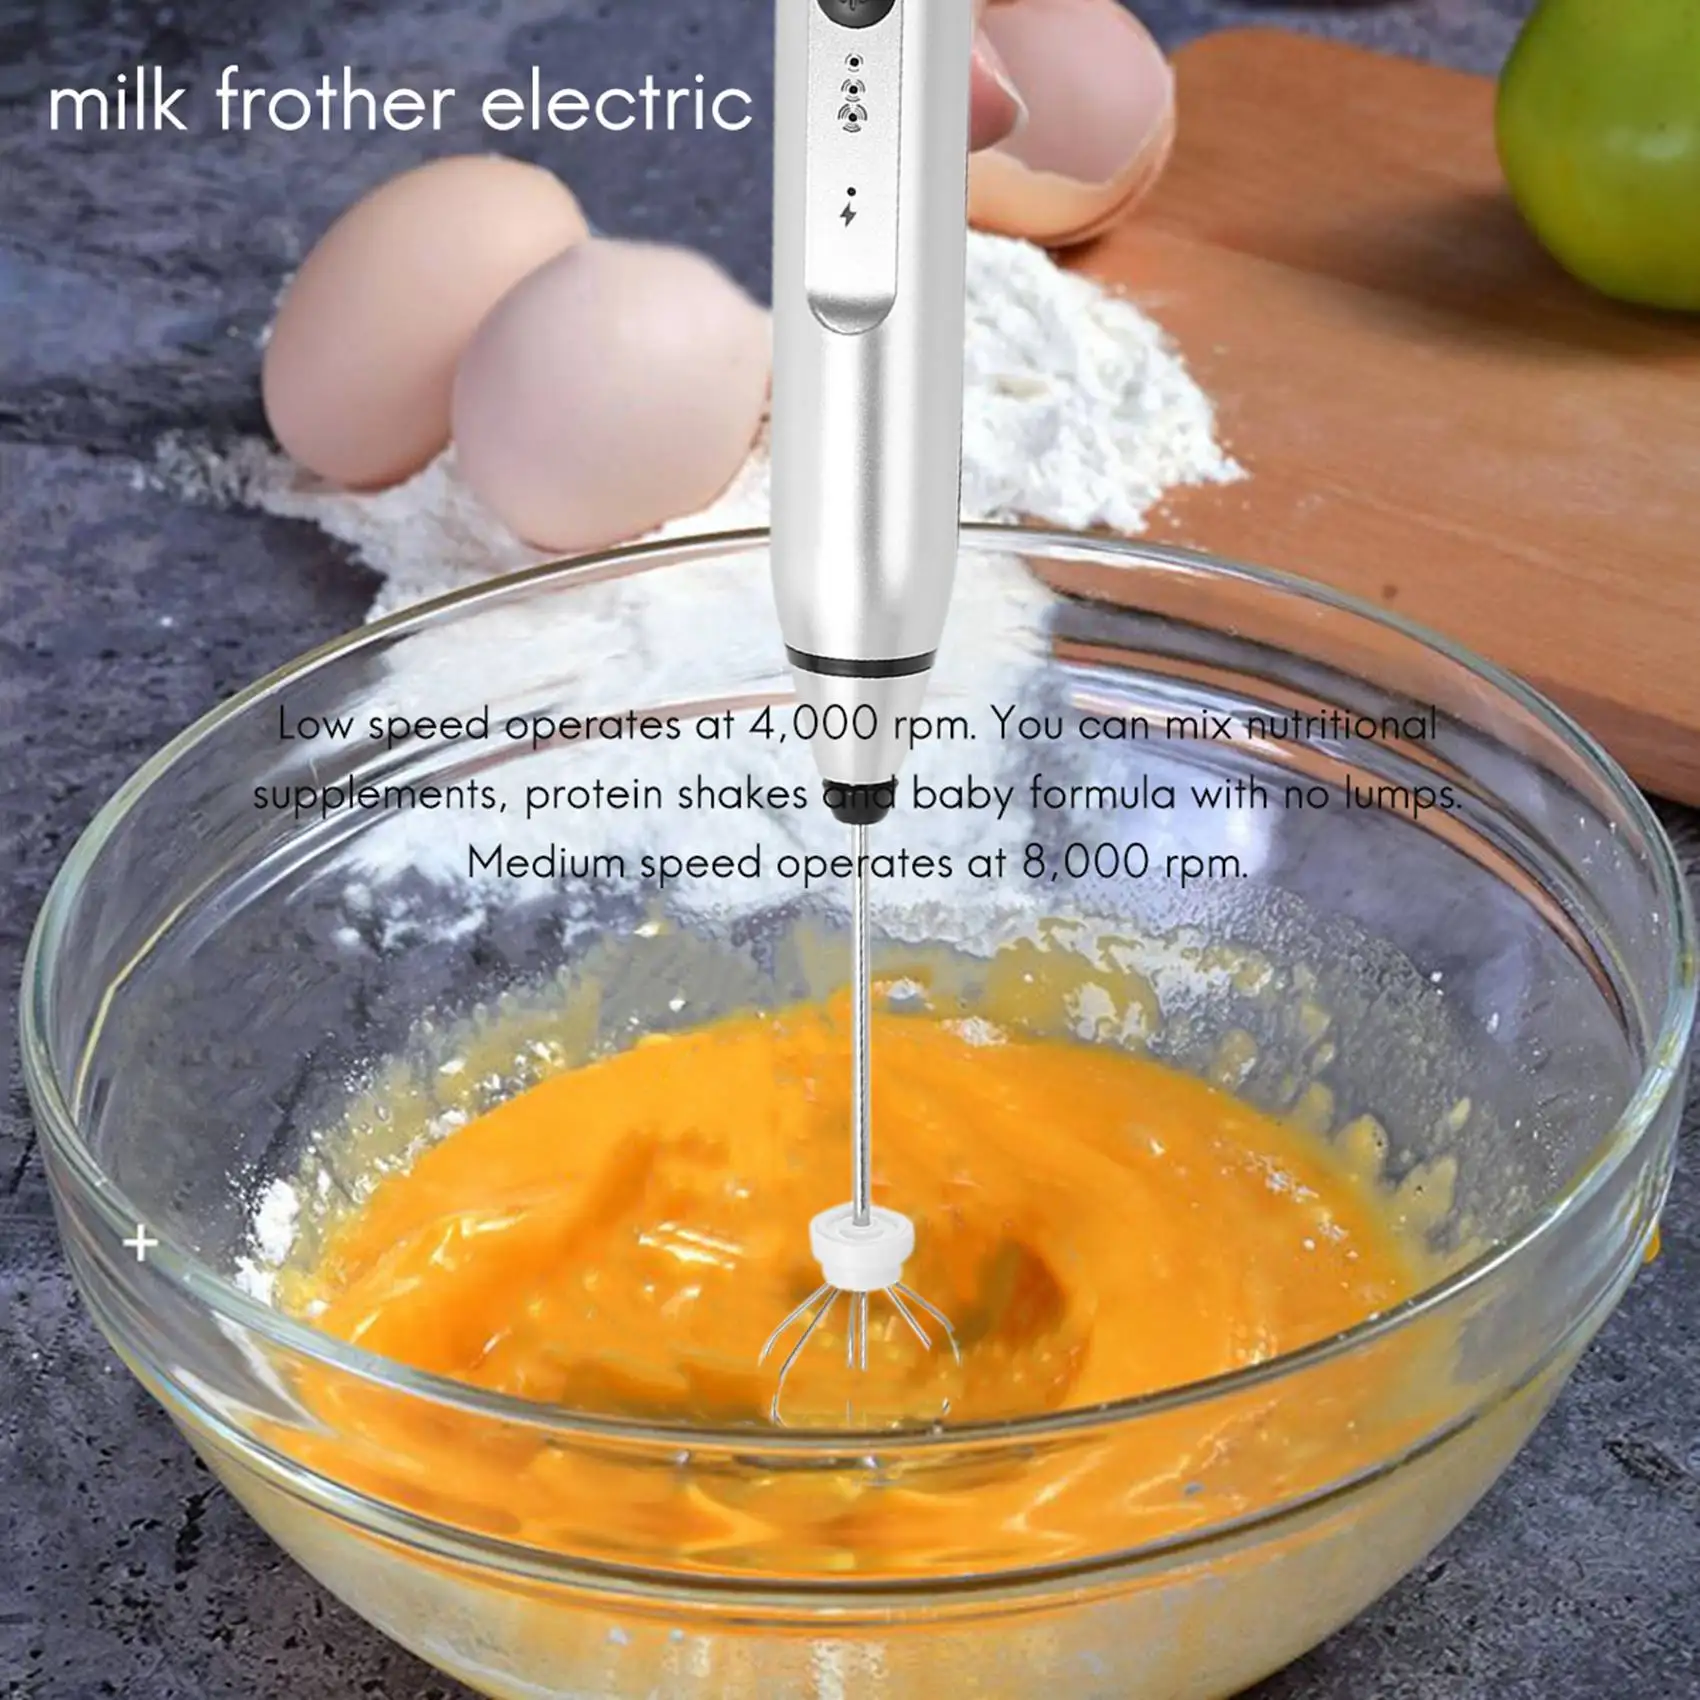 https://ae01.alicdn.com/kf/S6e892fe711ce438bbbd119239ba17e8cj/Rechargeable-Electric-Milk-Frother-With-2-Whisks-Handheld-Foam-Maker-For-Coffee-Latte-Cappuccino-Hot-Chocolate.jpg